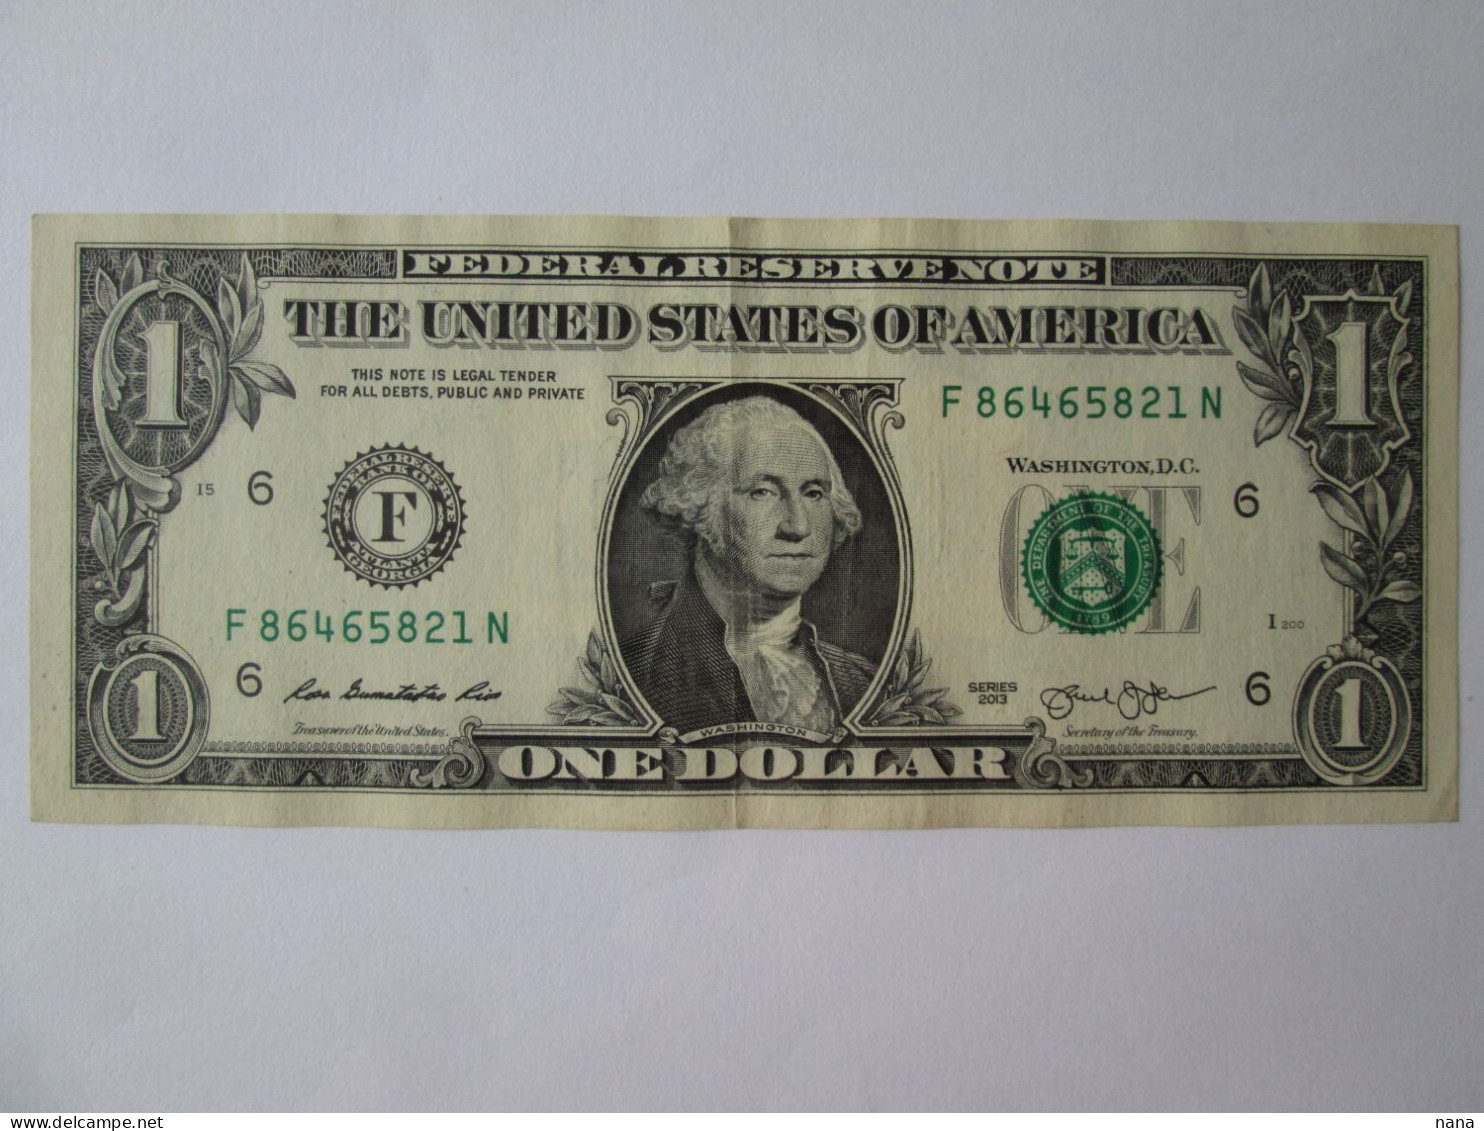 USA 1 Dollar 2013 Banknote See Pictures - Valuta Nazionale